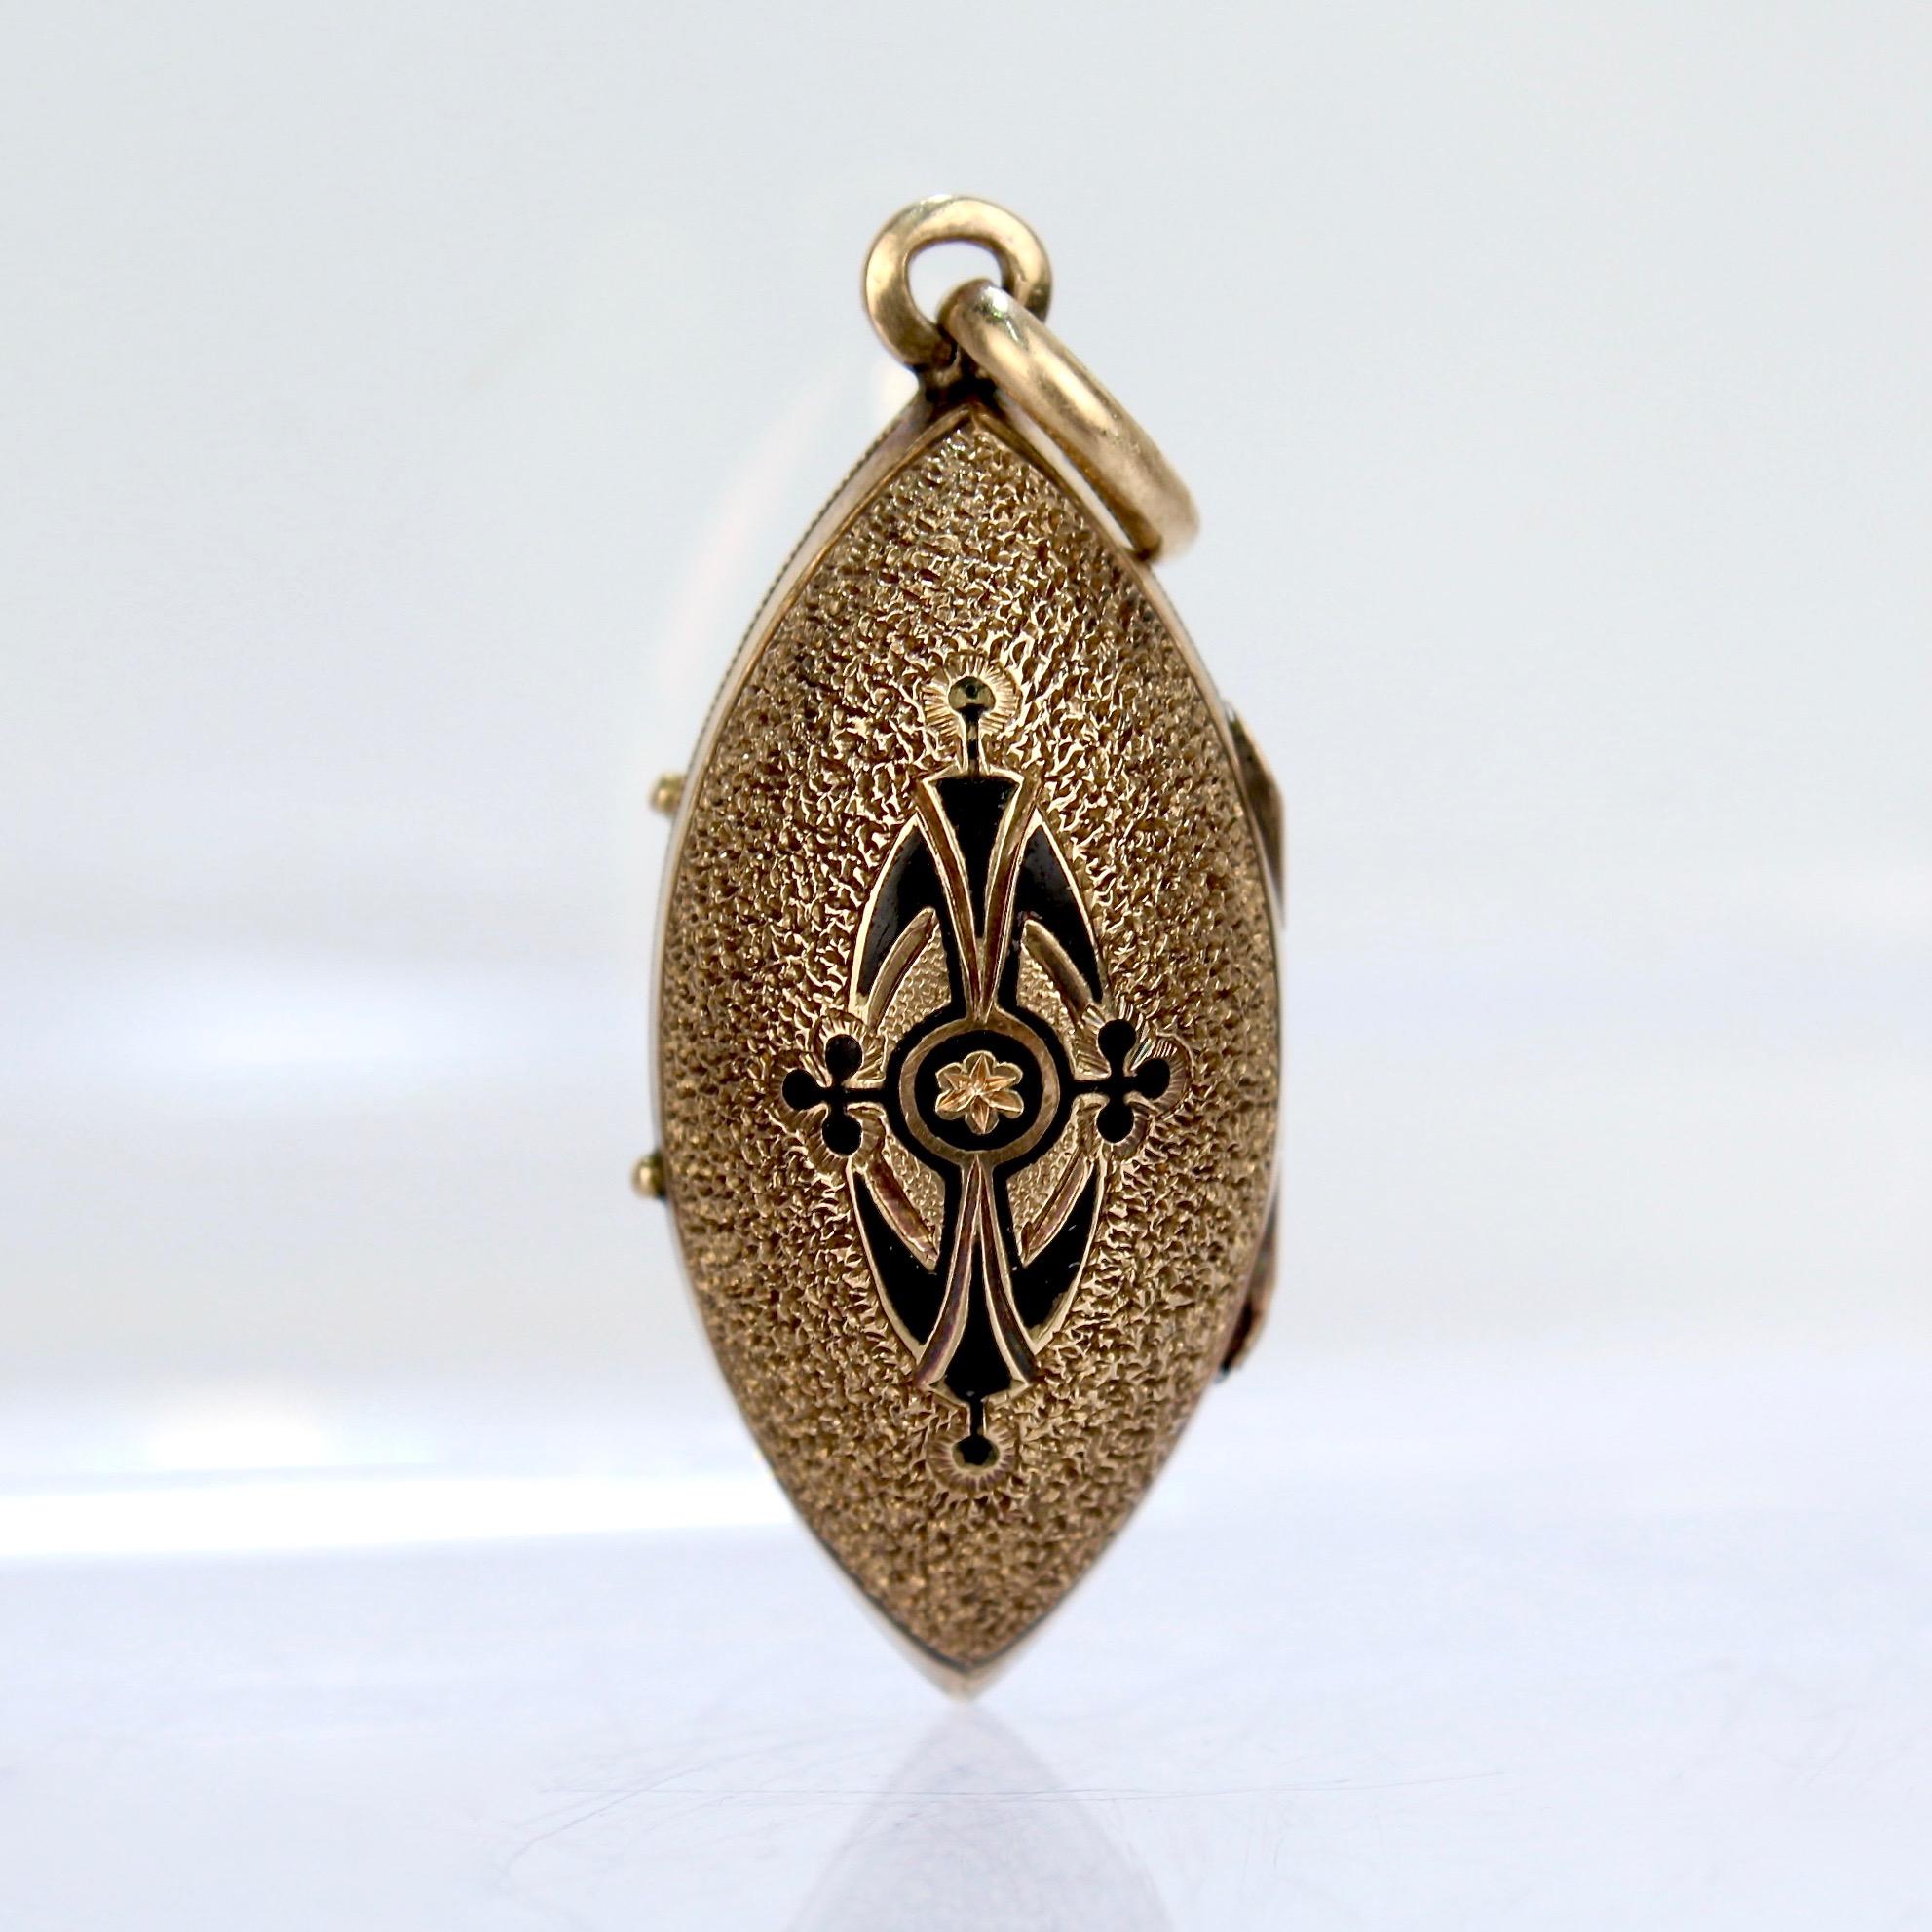 A fine Victorian 14k gold mourning locket.

The locket is fashioned as a pendant with finely textured 14K gold and black enamel to the front and a back section that houses a lock of hair. 

The locket is shaped like a football or a prolate spheroid